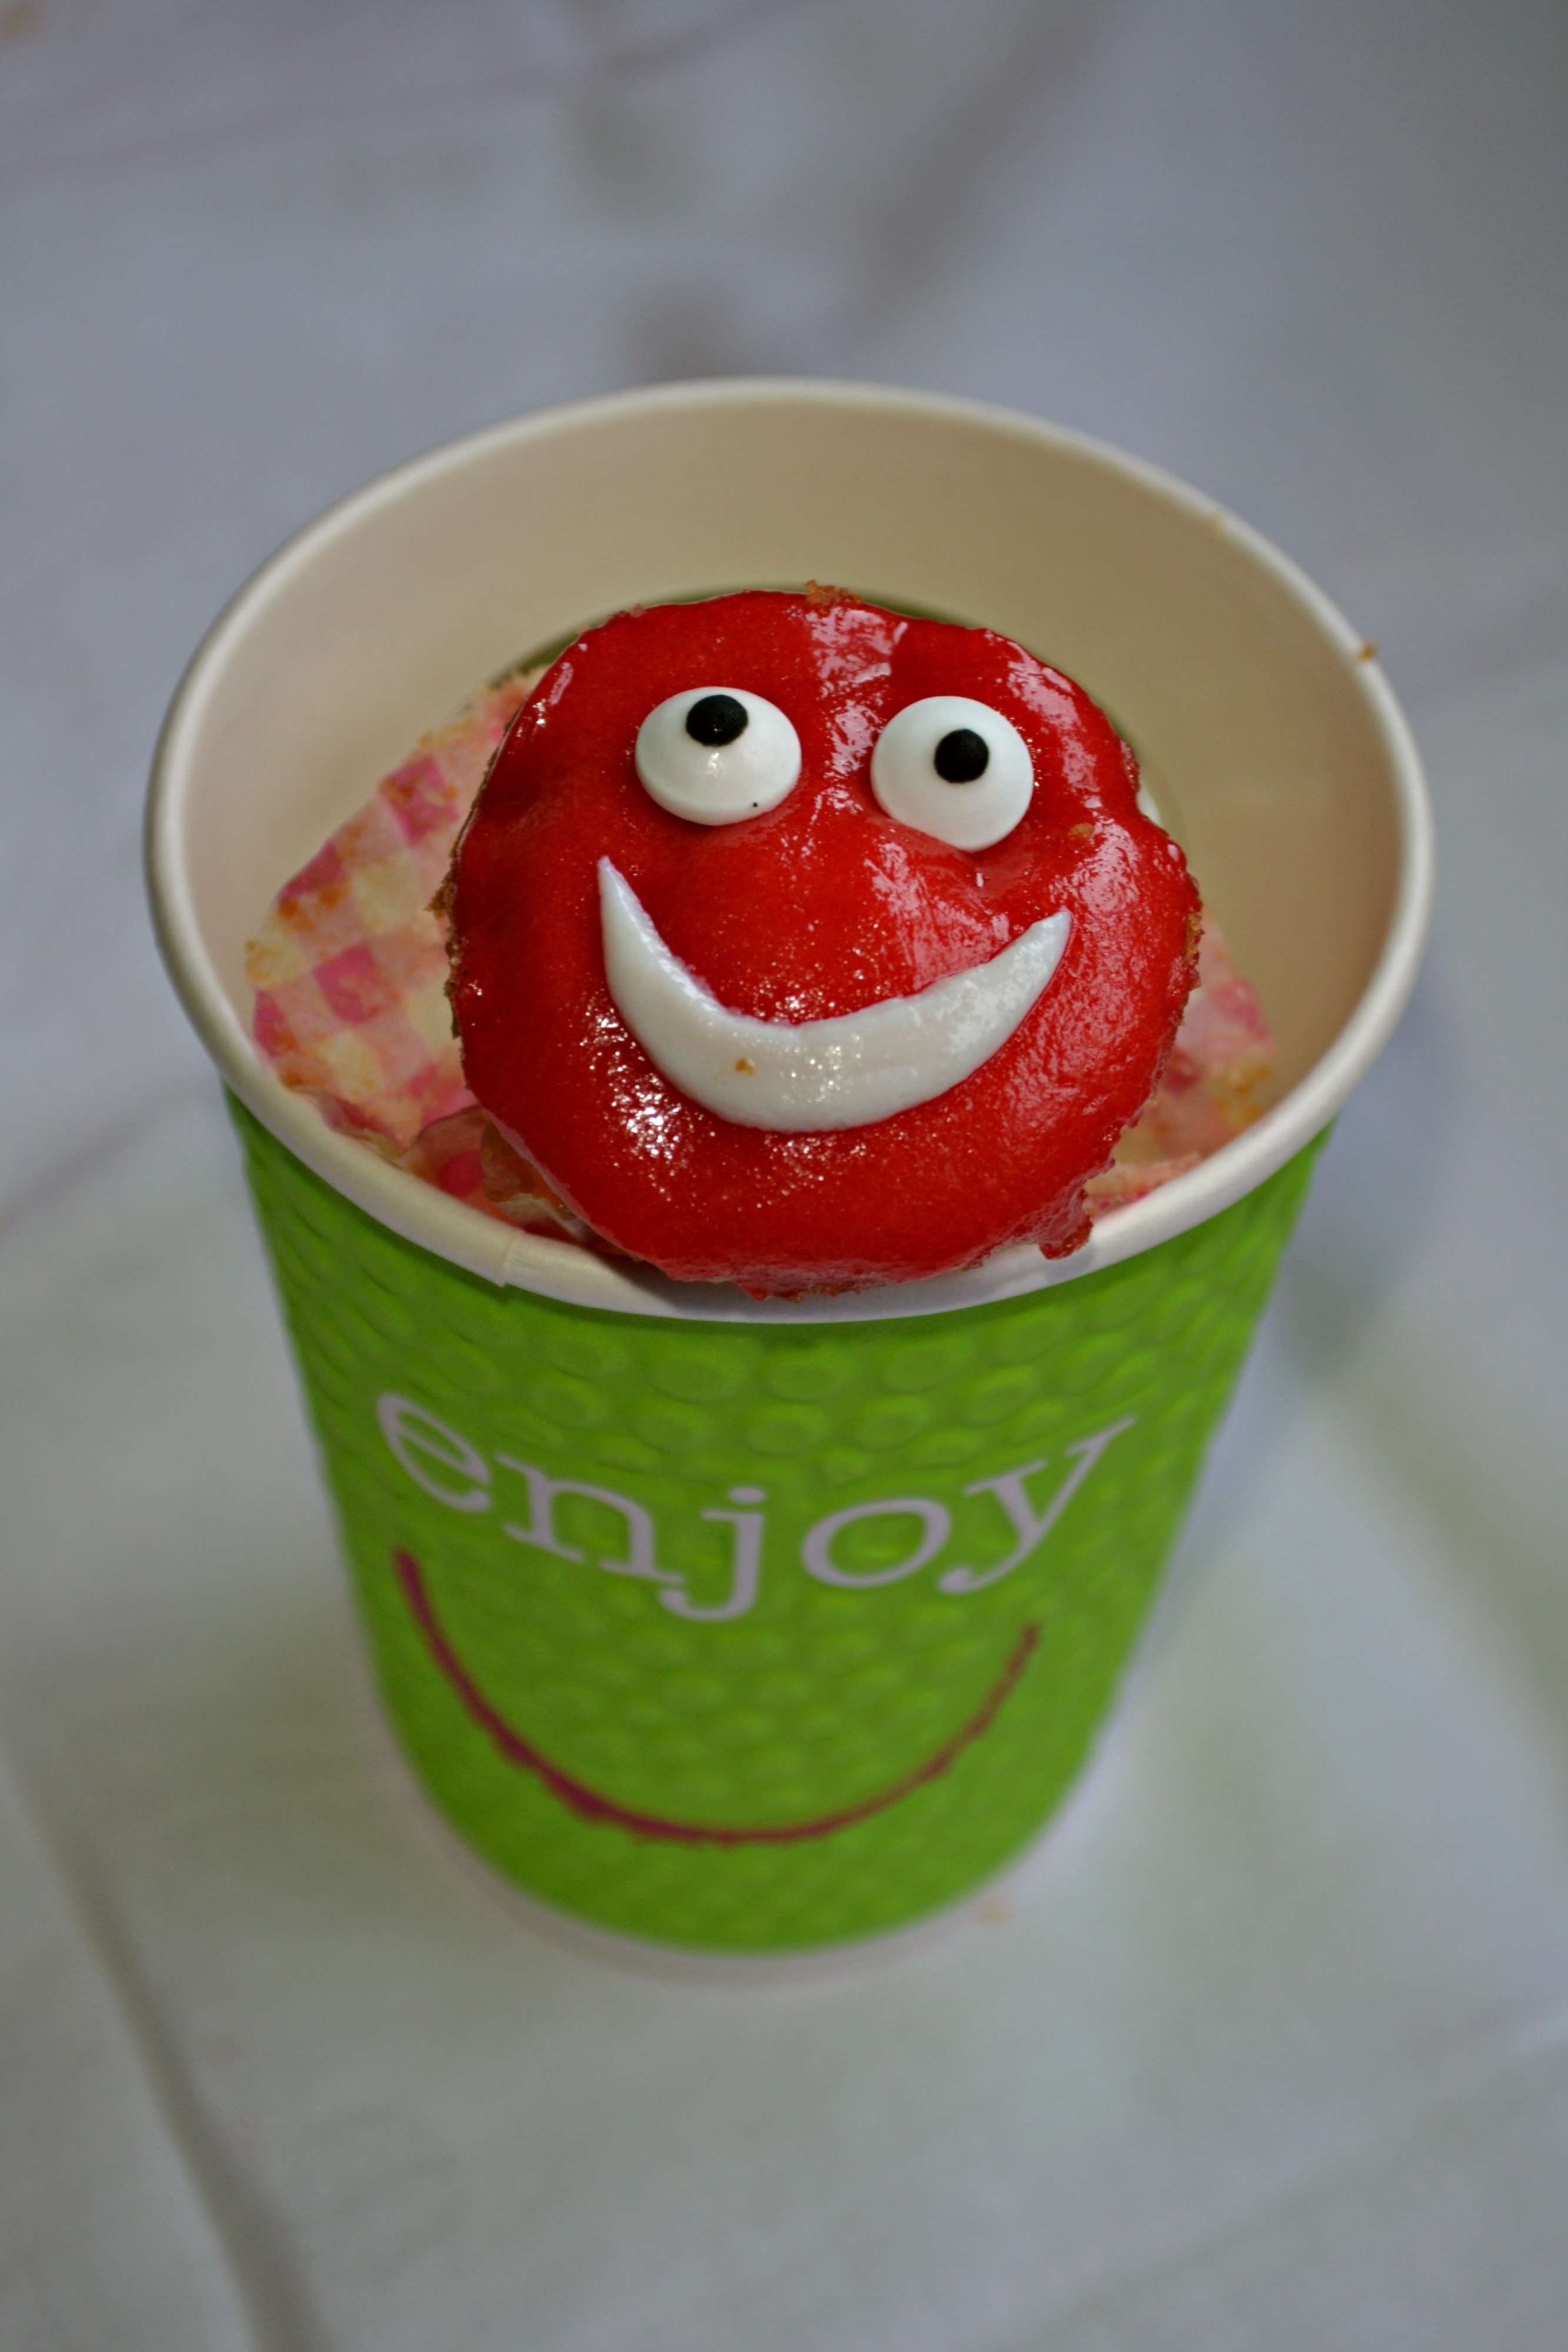 red and white smiley emoticon cupcake